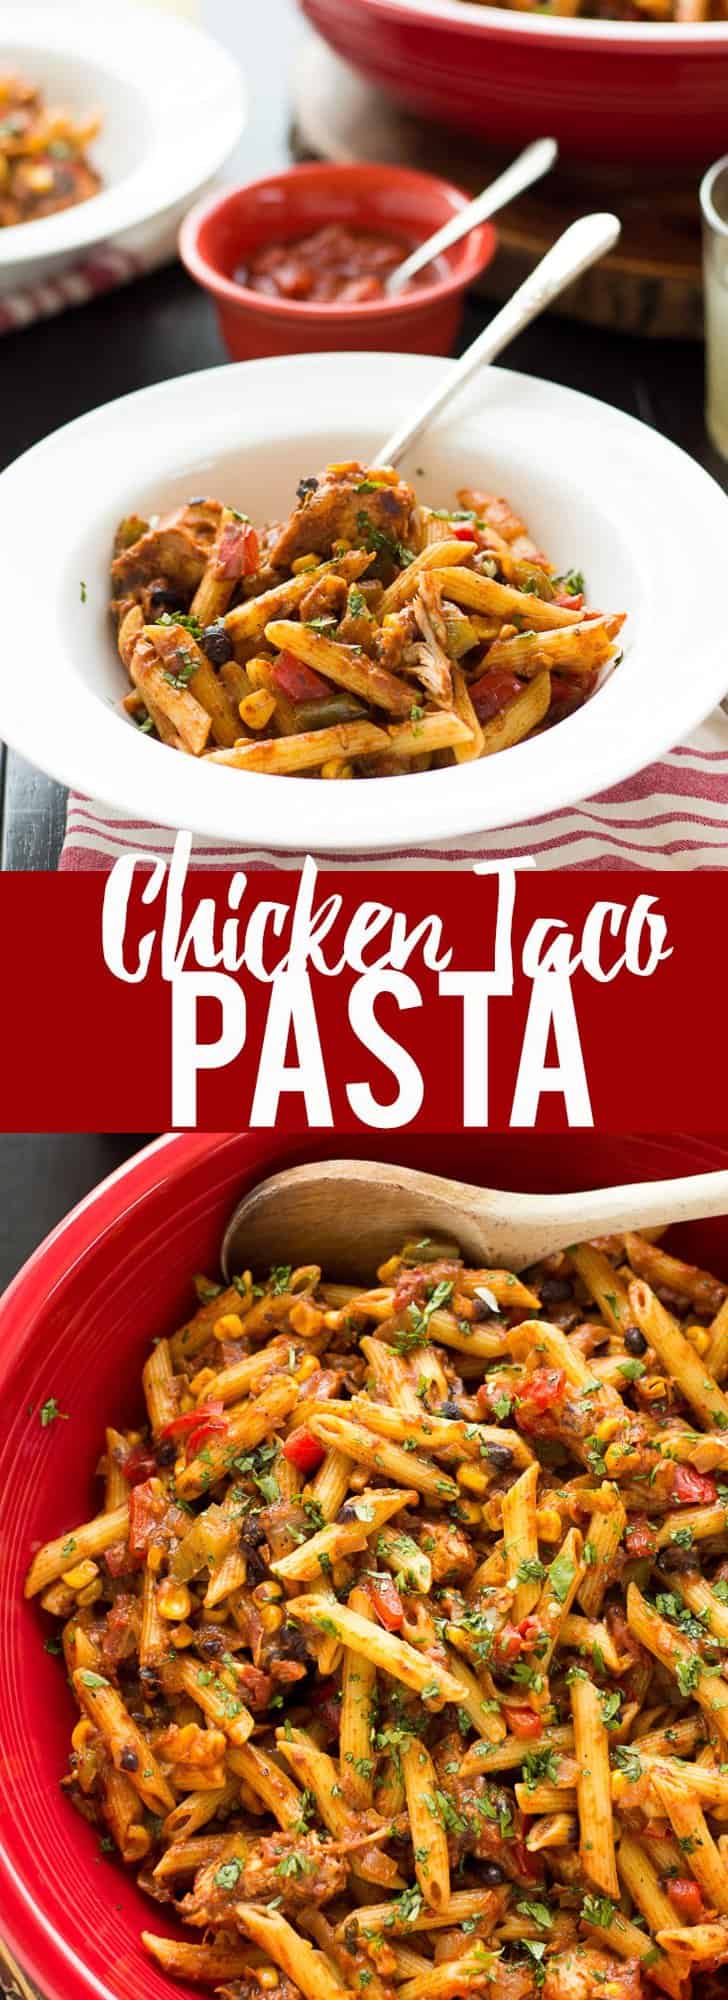 This Chicken Taco Pasta dish takes less than 30 minutes to make and is packed full of flavors that the whole family will love! #ad #HealthyPastaMonth